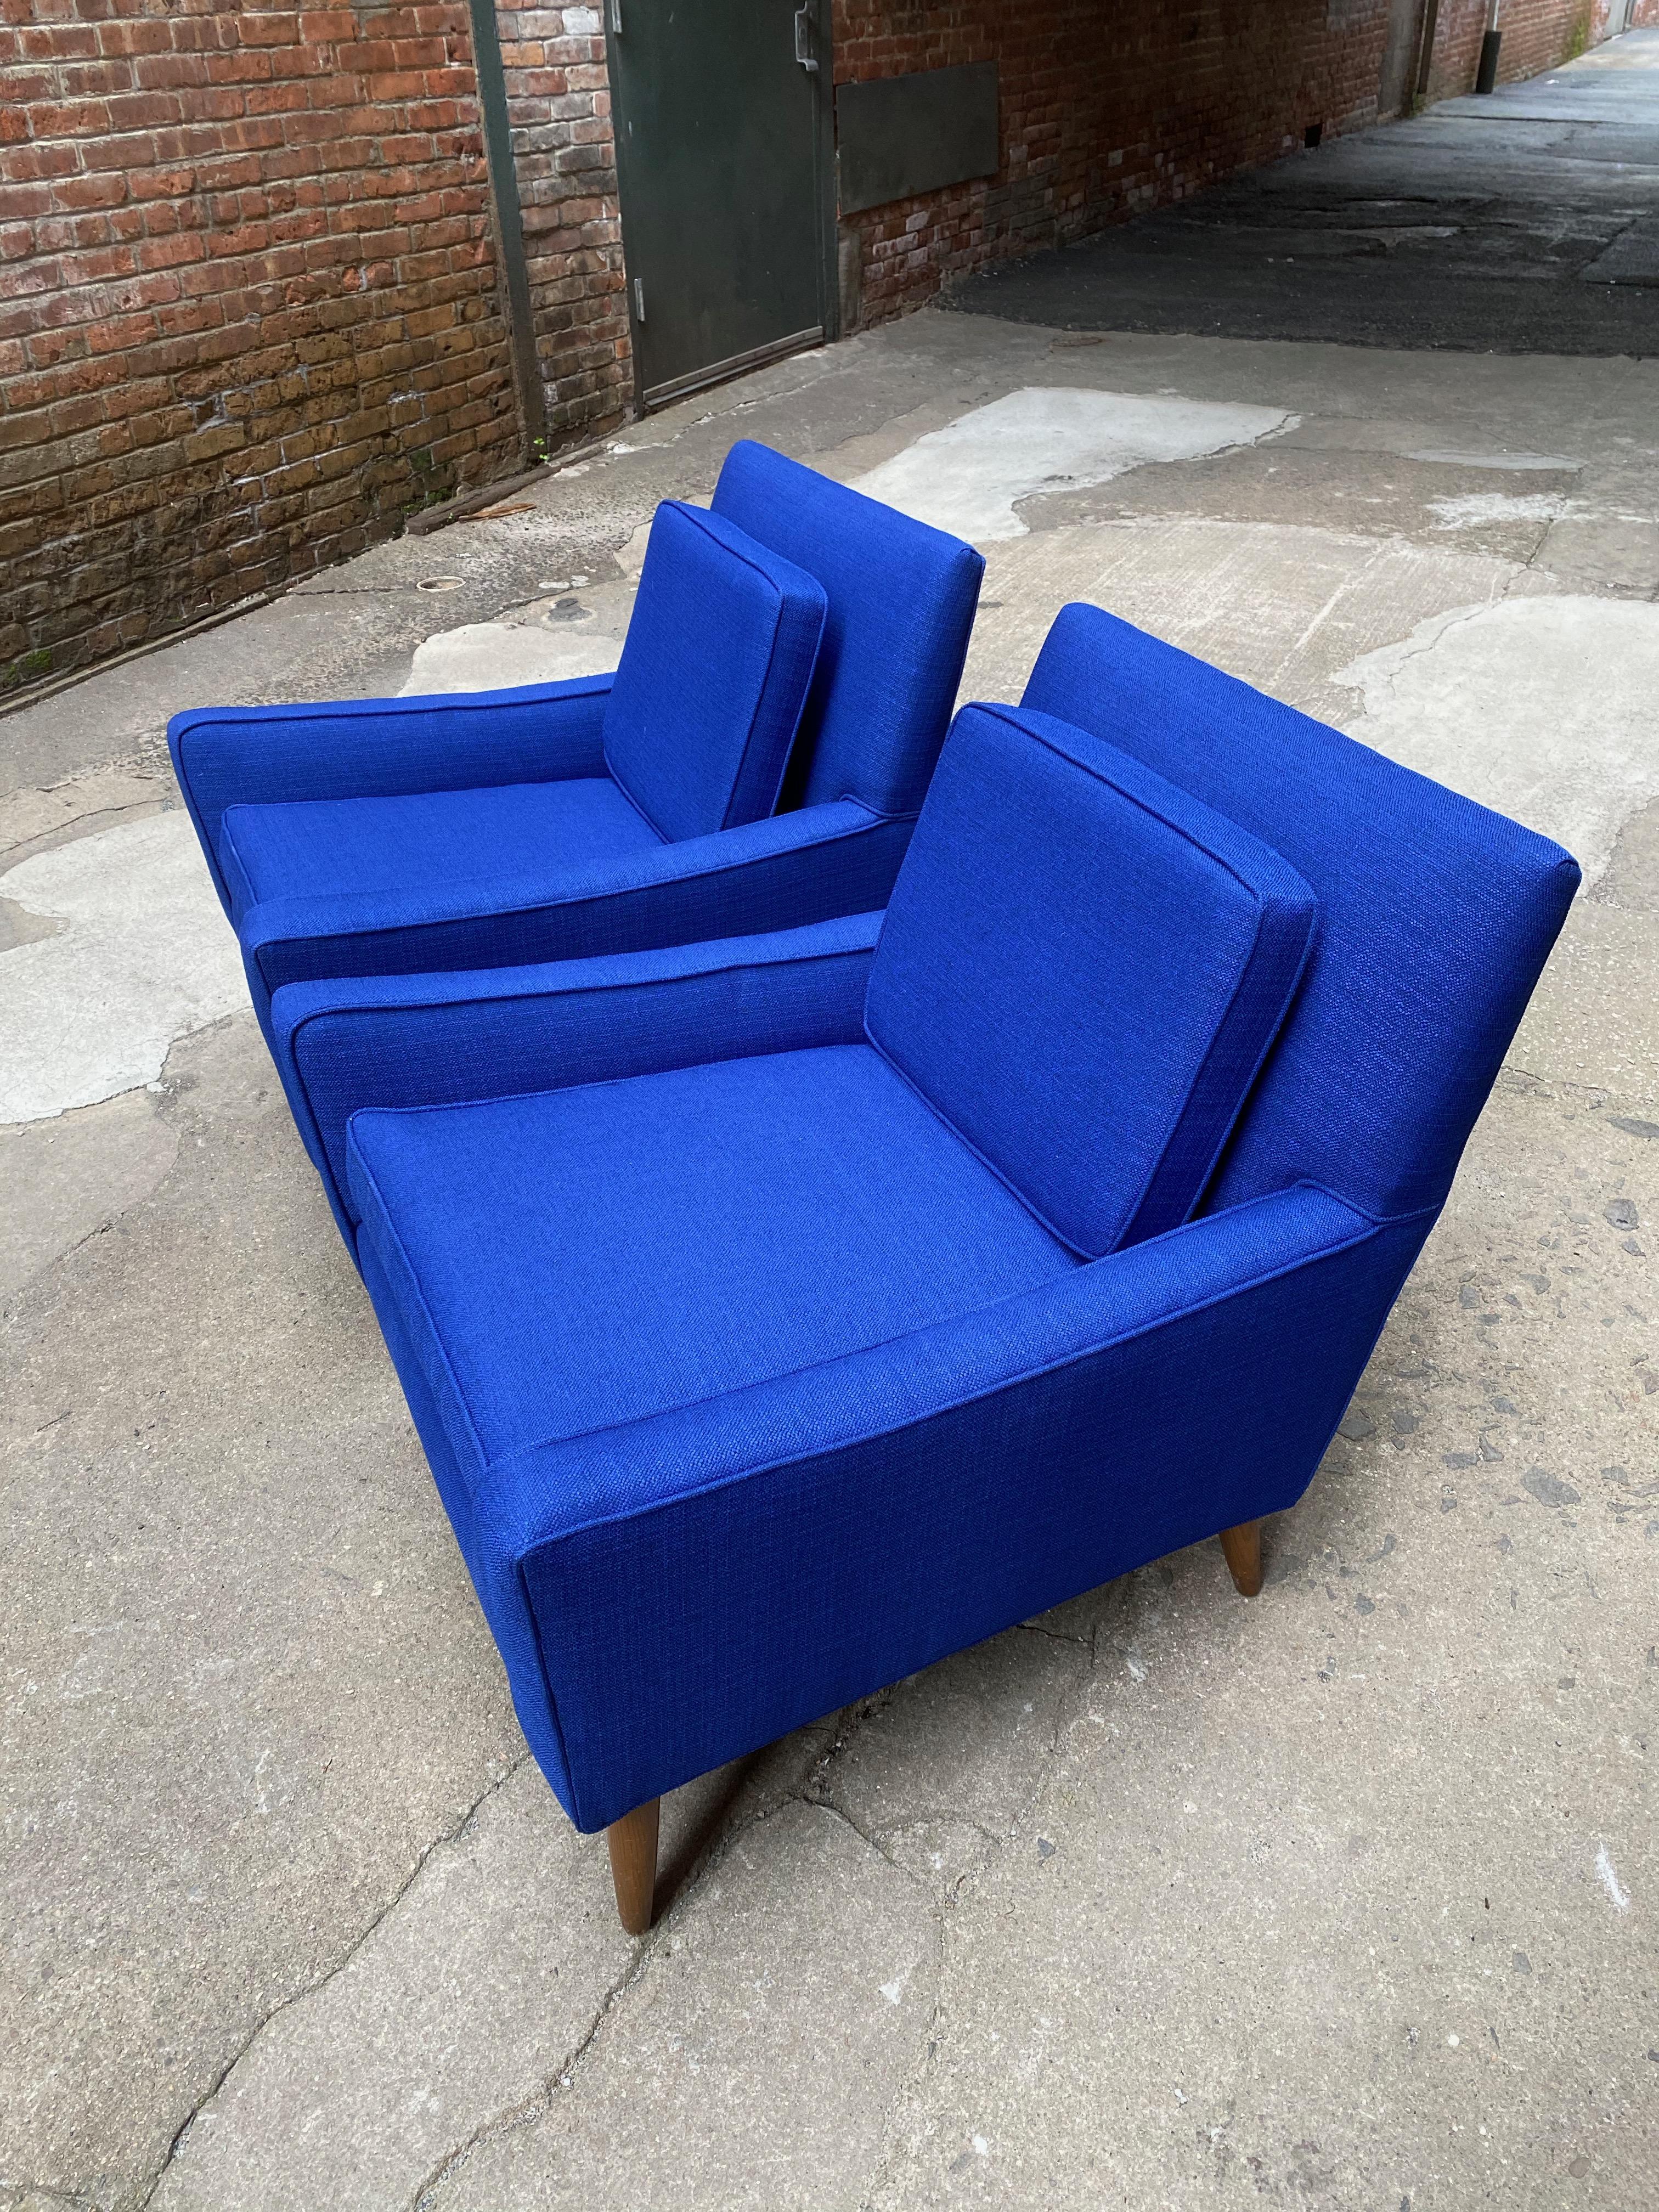 Pair of 1960s Lounge Chairs the Manner of Paul McCobb For Sale 2